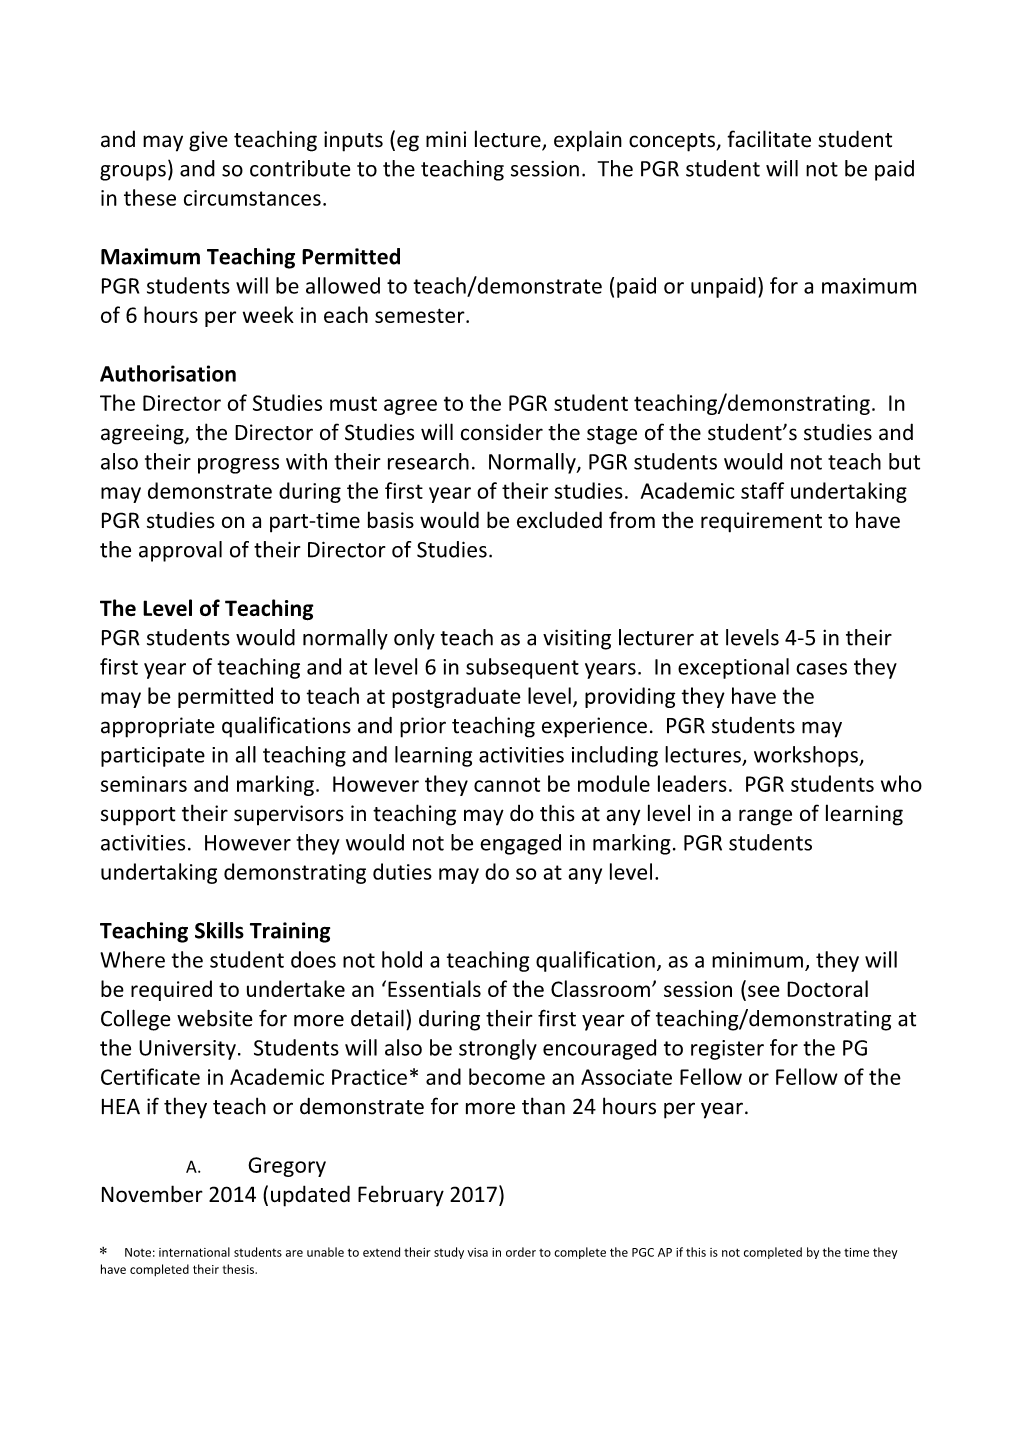 Postgraduate Research Students - Teaching And/Or Demonstrating Opportunities